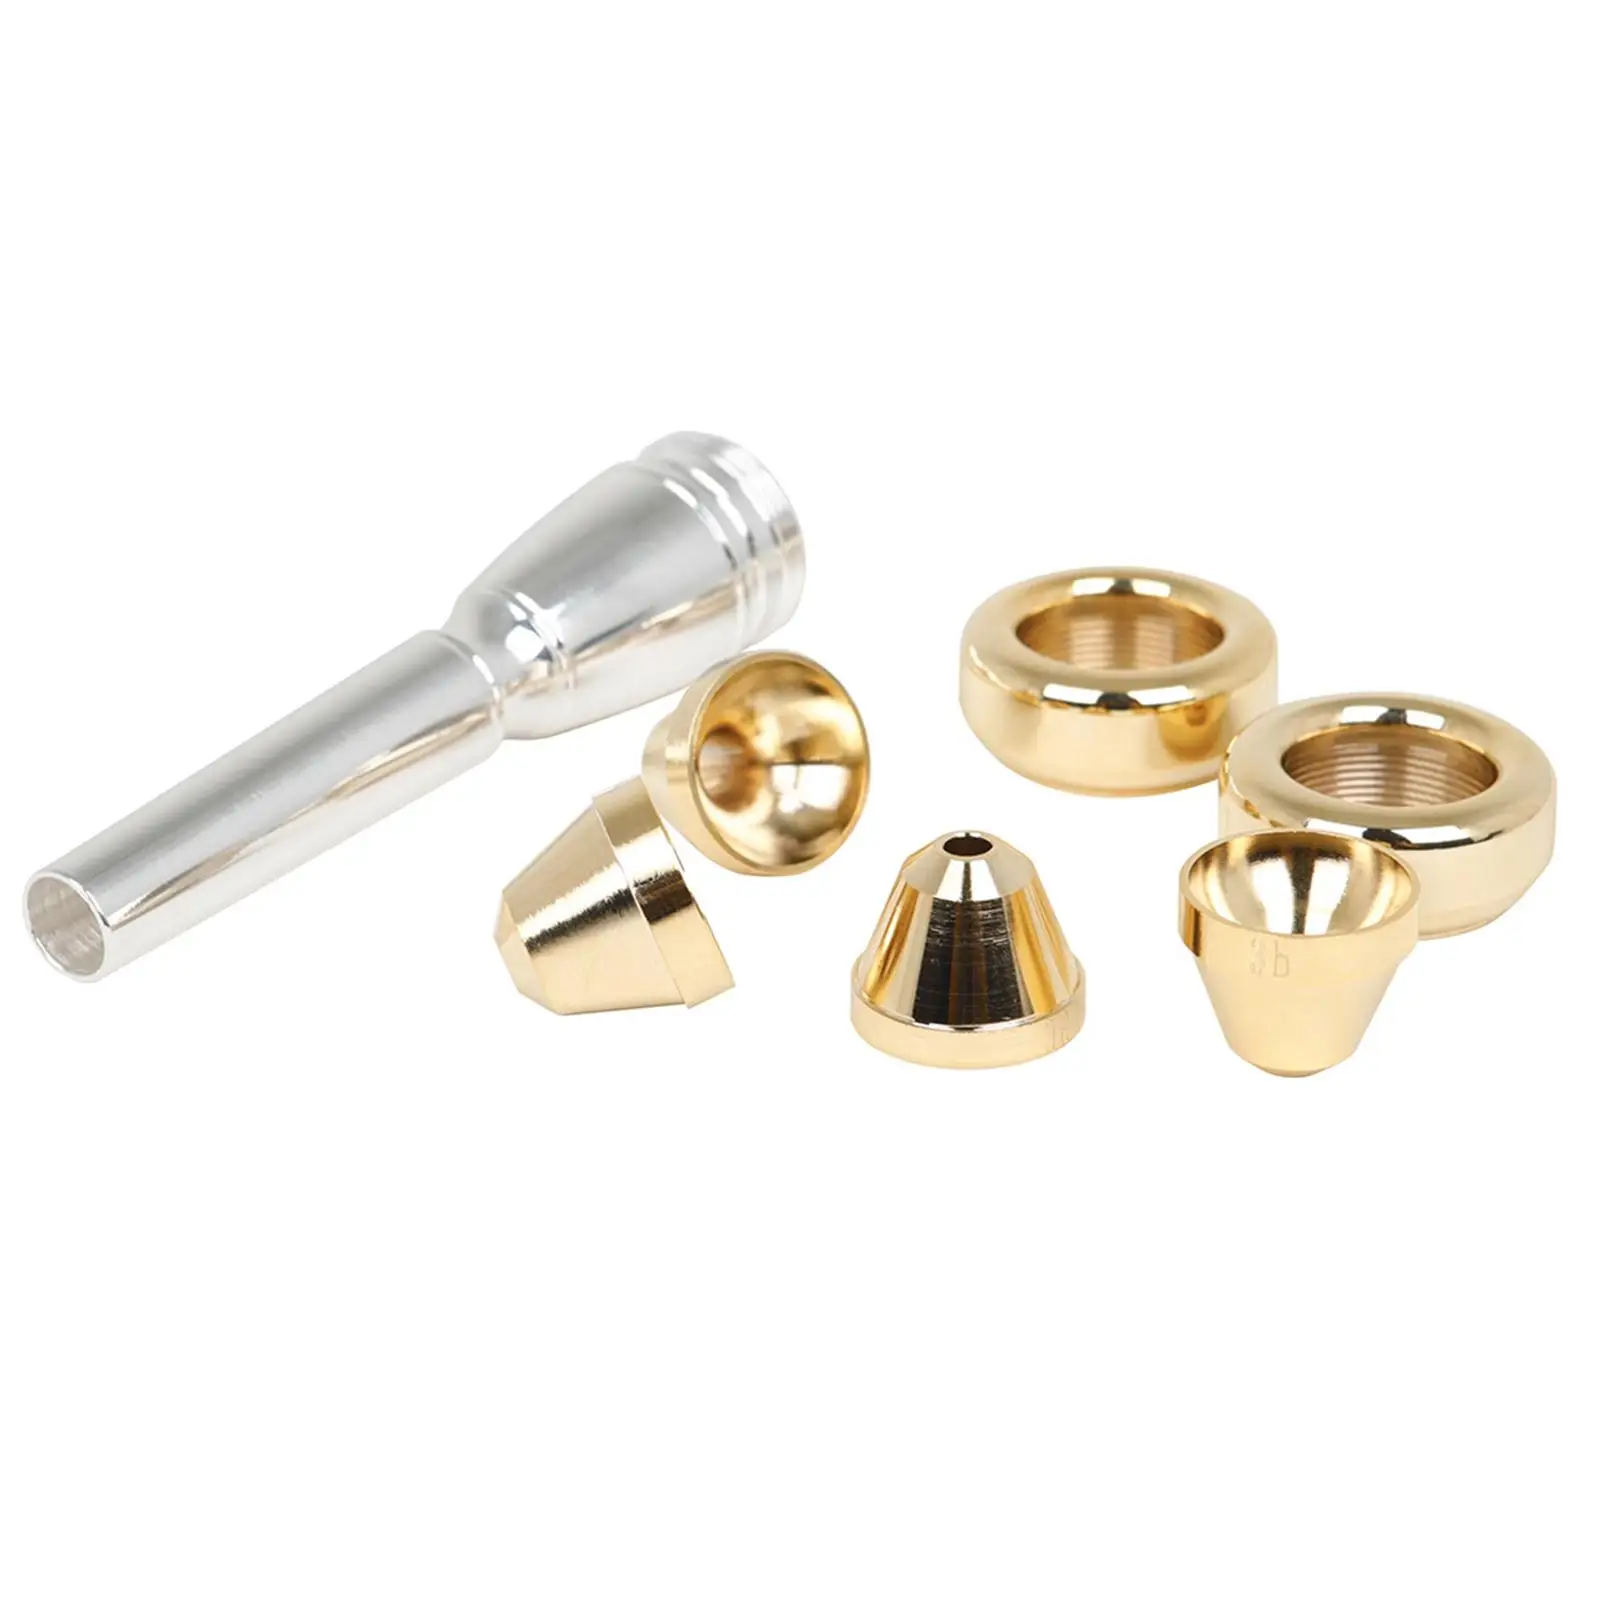 Brass Trumpet Mouthpiece Trumpet Lovers Gifts Mouth Strength Training Durable